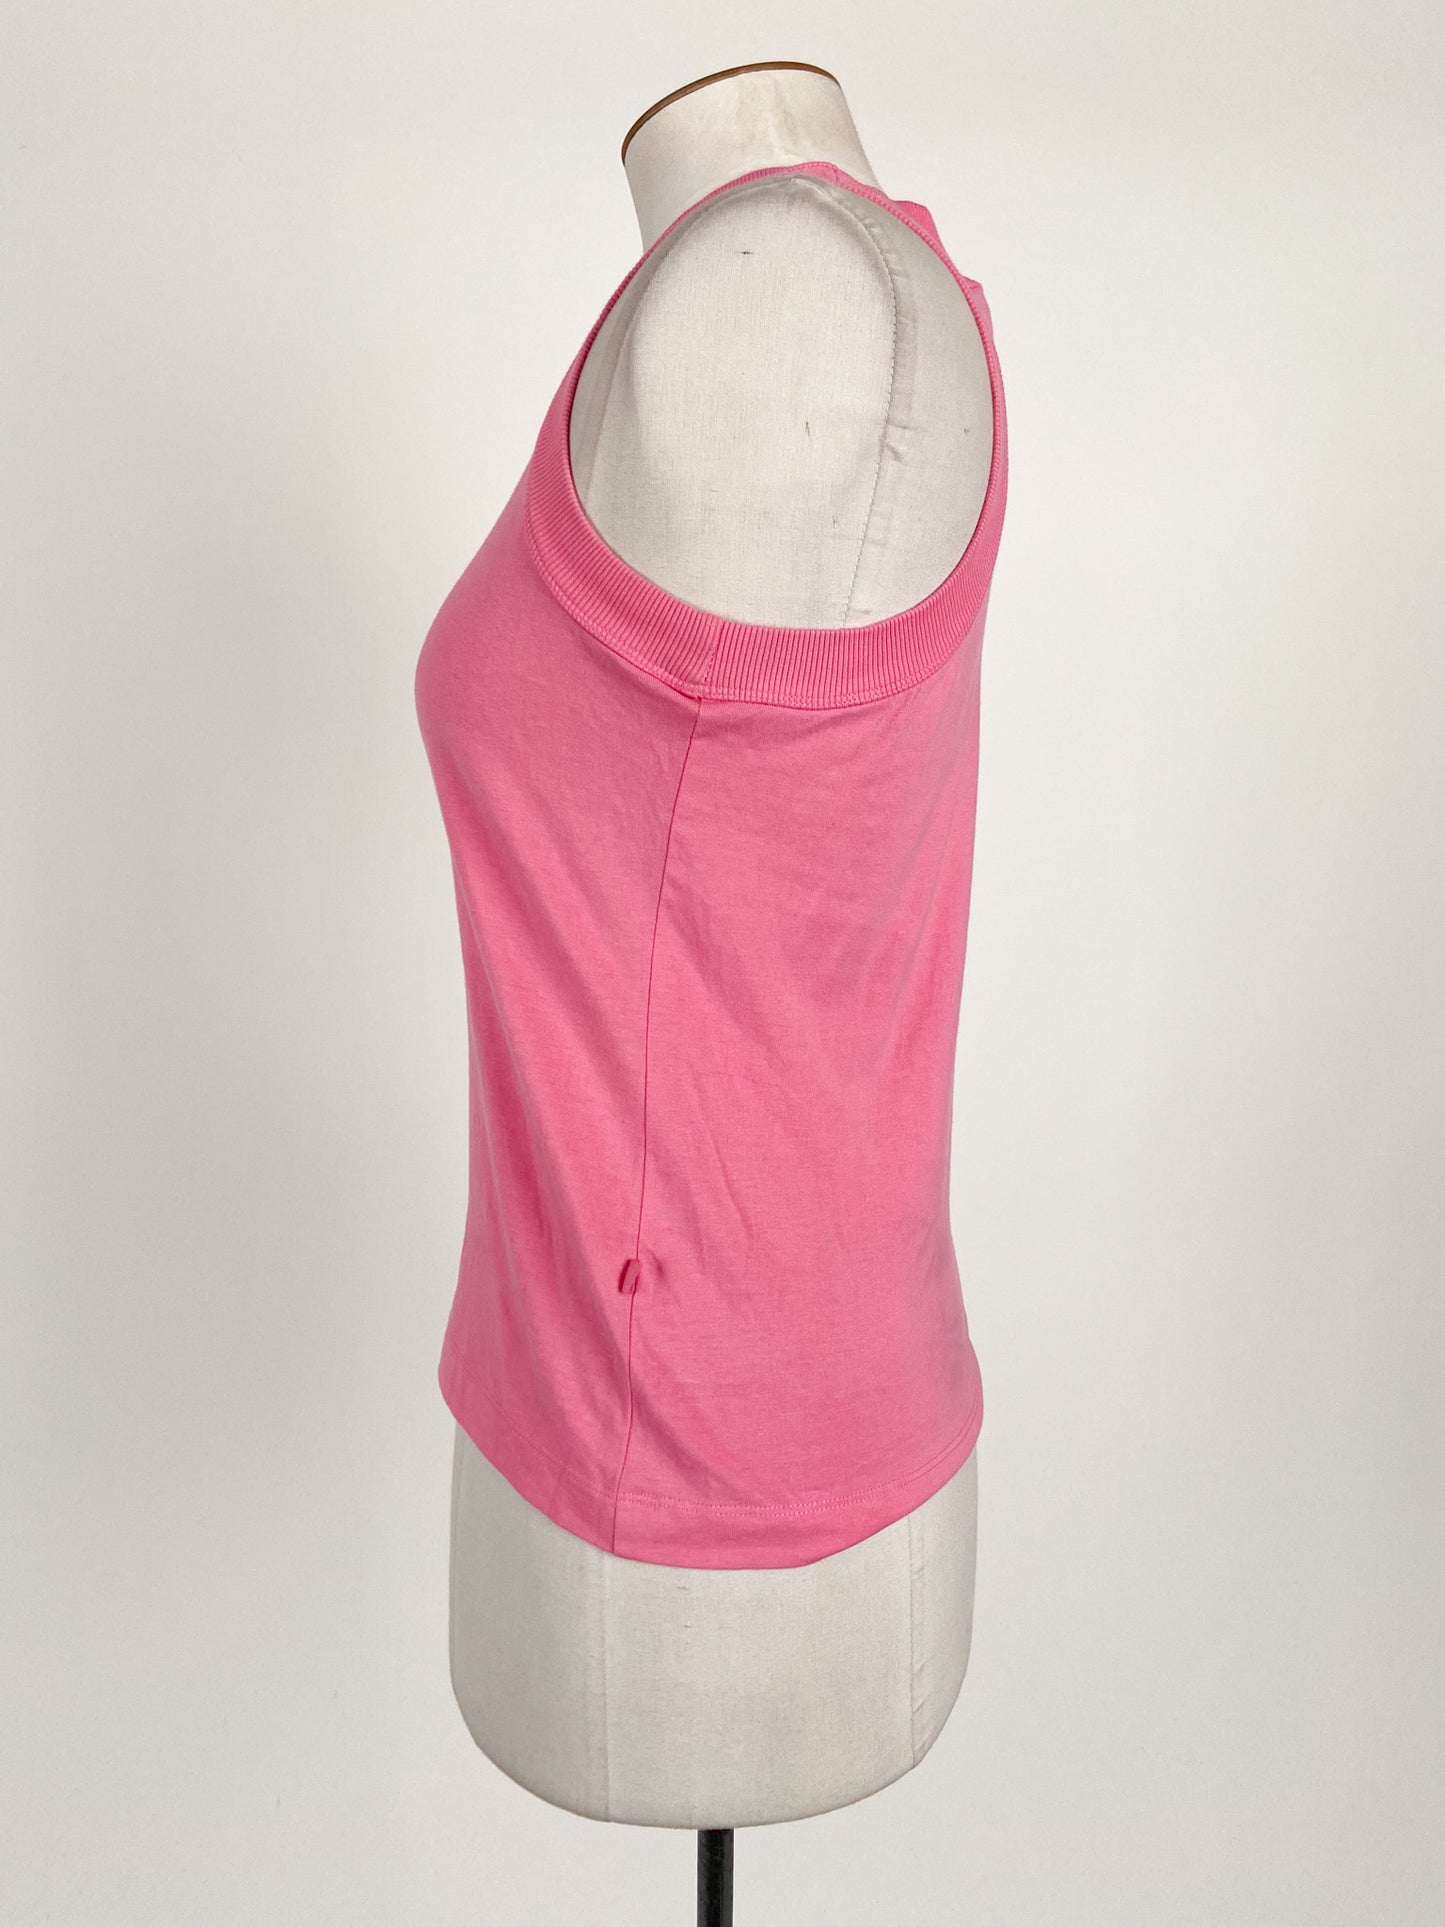 Kowtow | Pink Casual Top | Size M